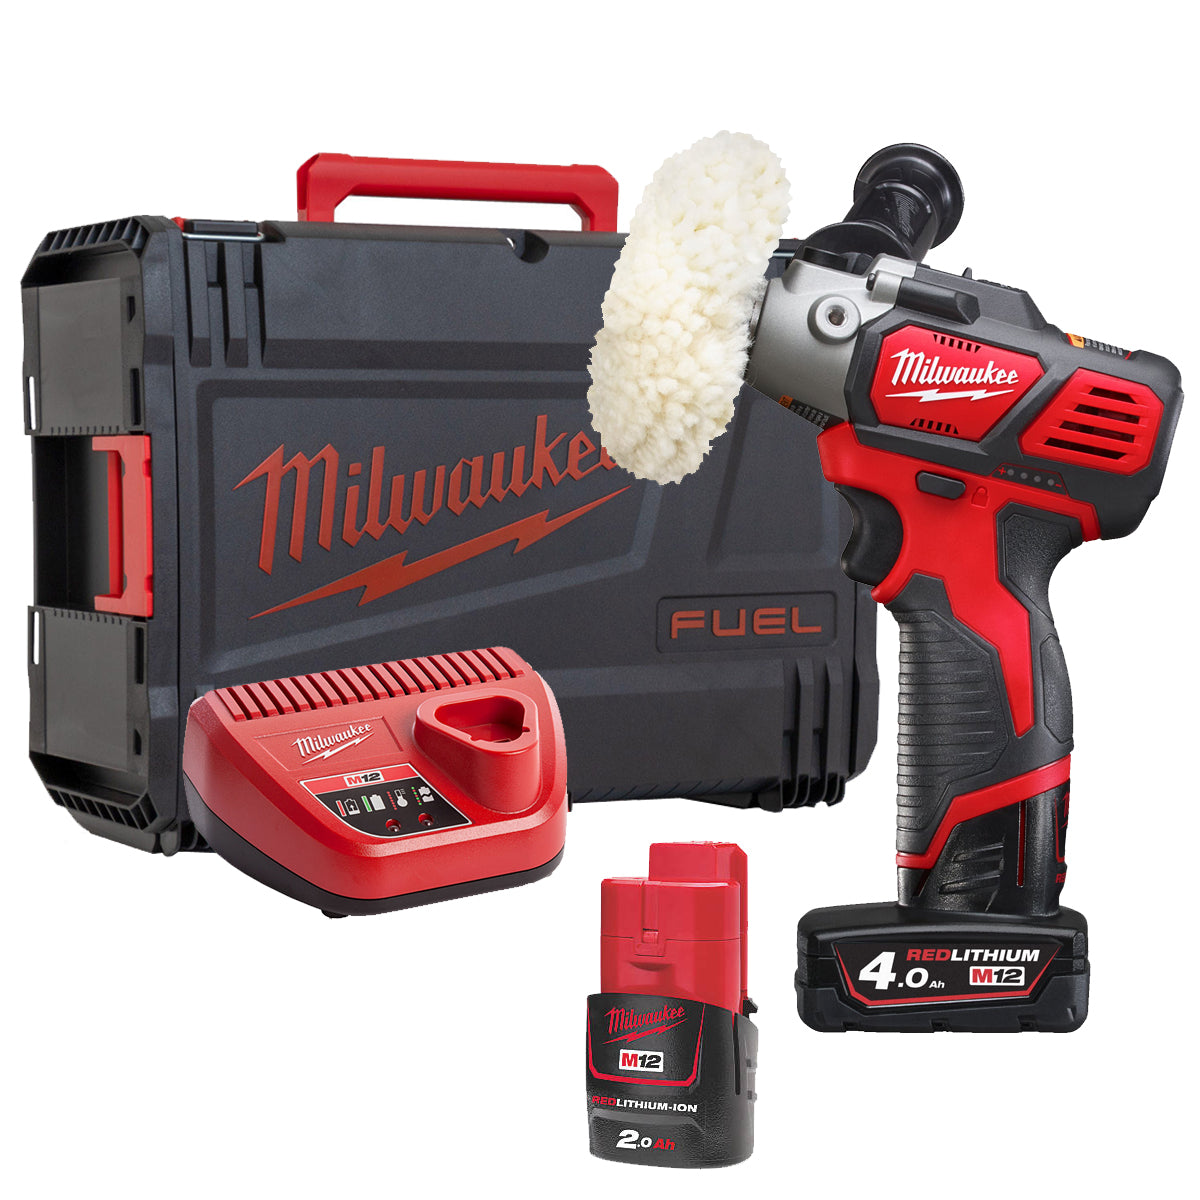 Milwaukee M12BPS-421X 12V Compact Polisher Sander with 2 x Batteries & Charger in Case 4933447802